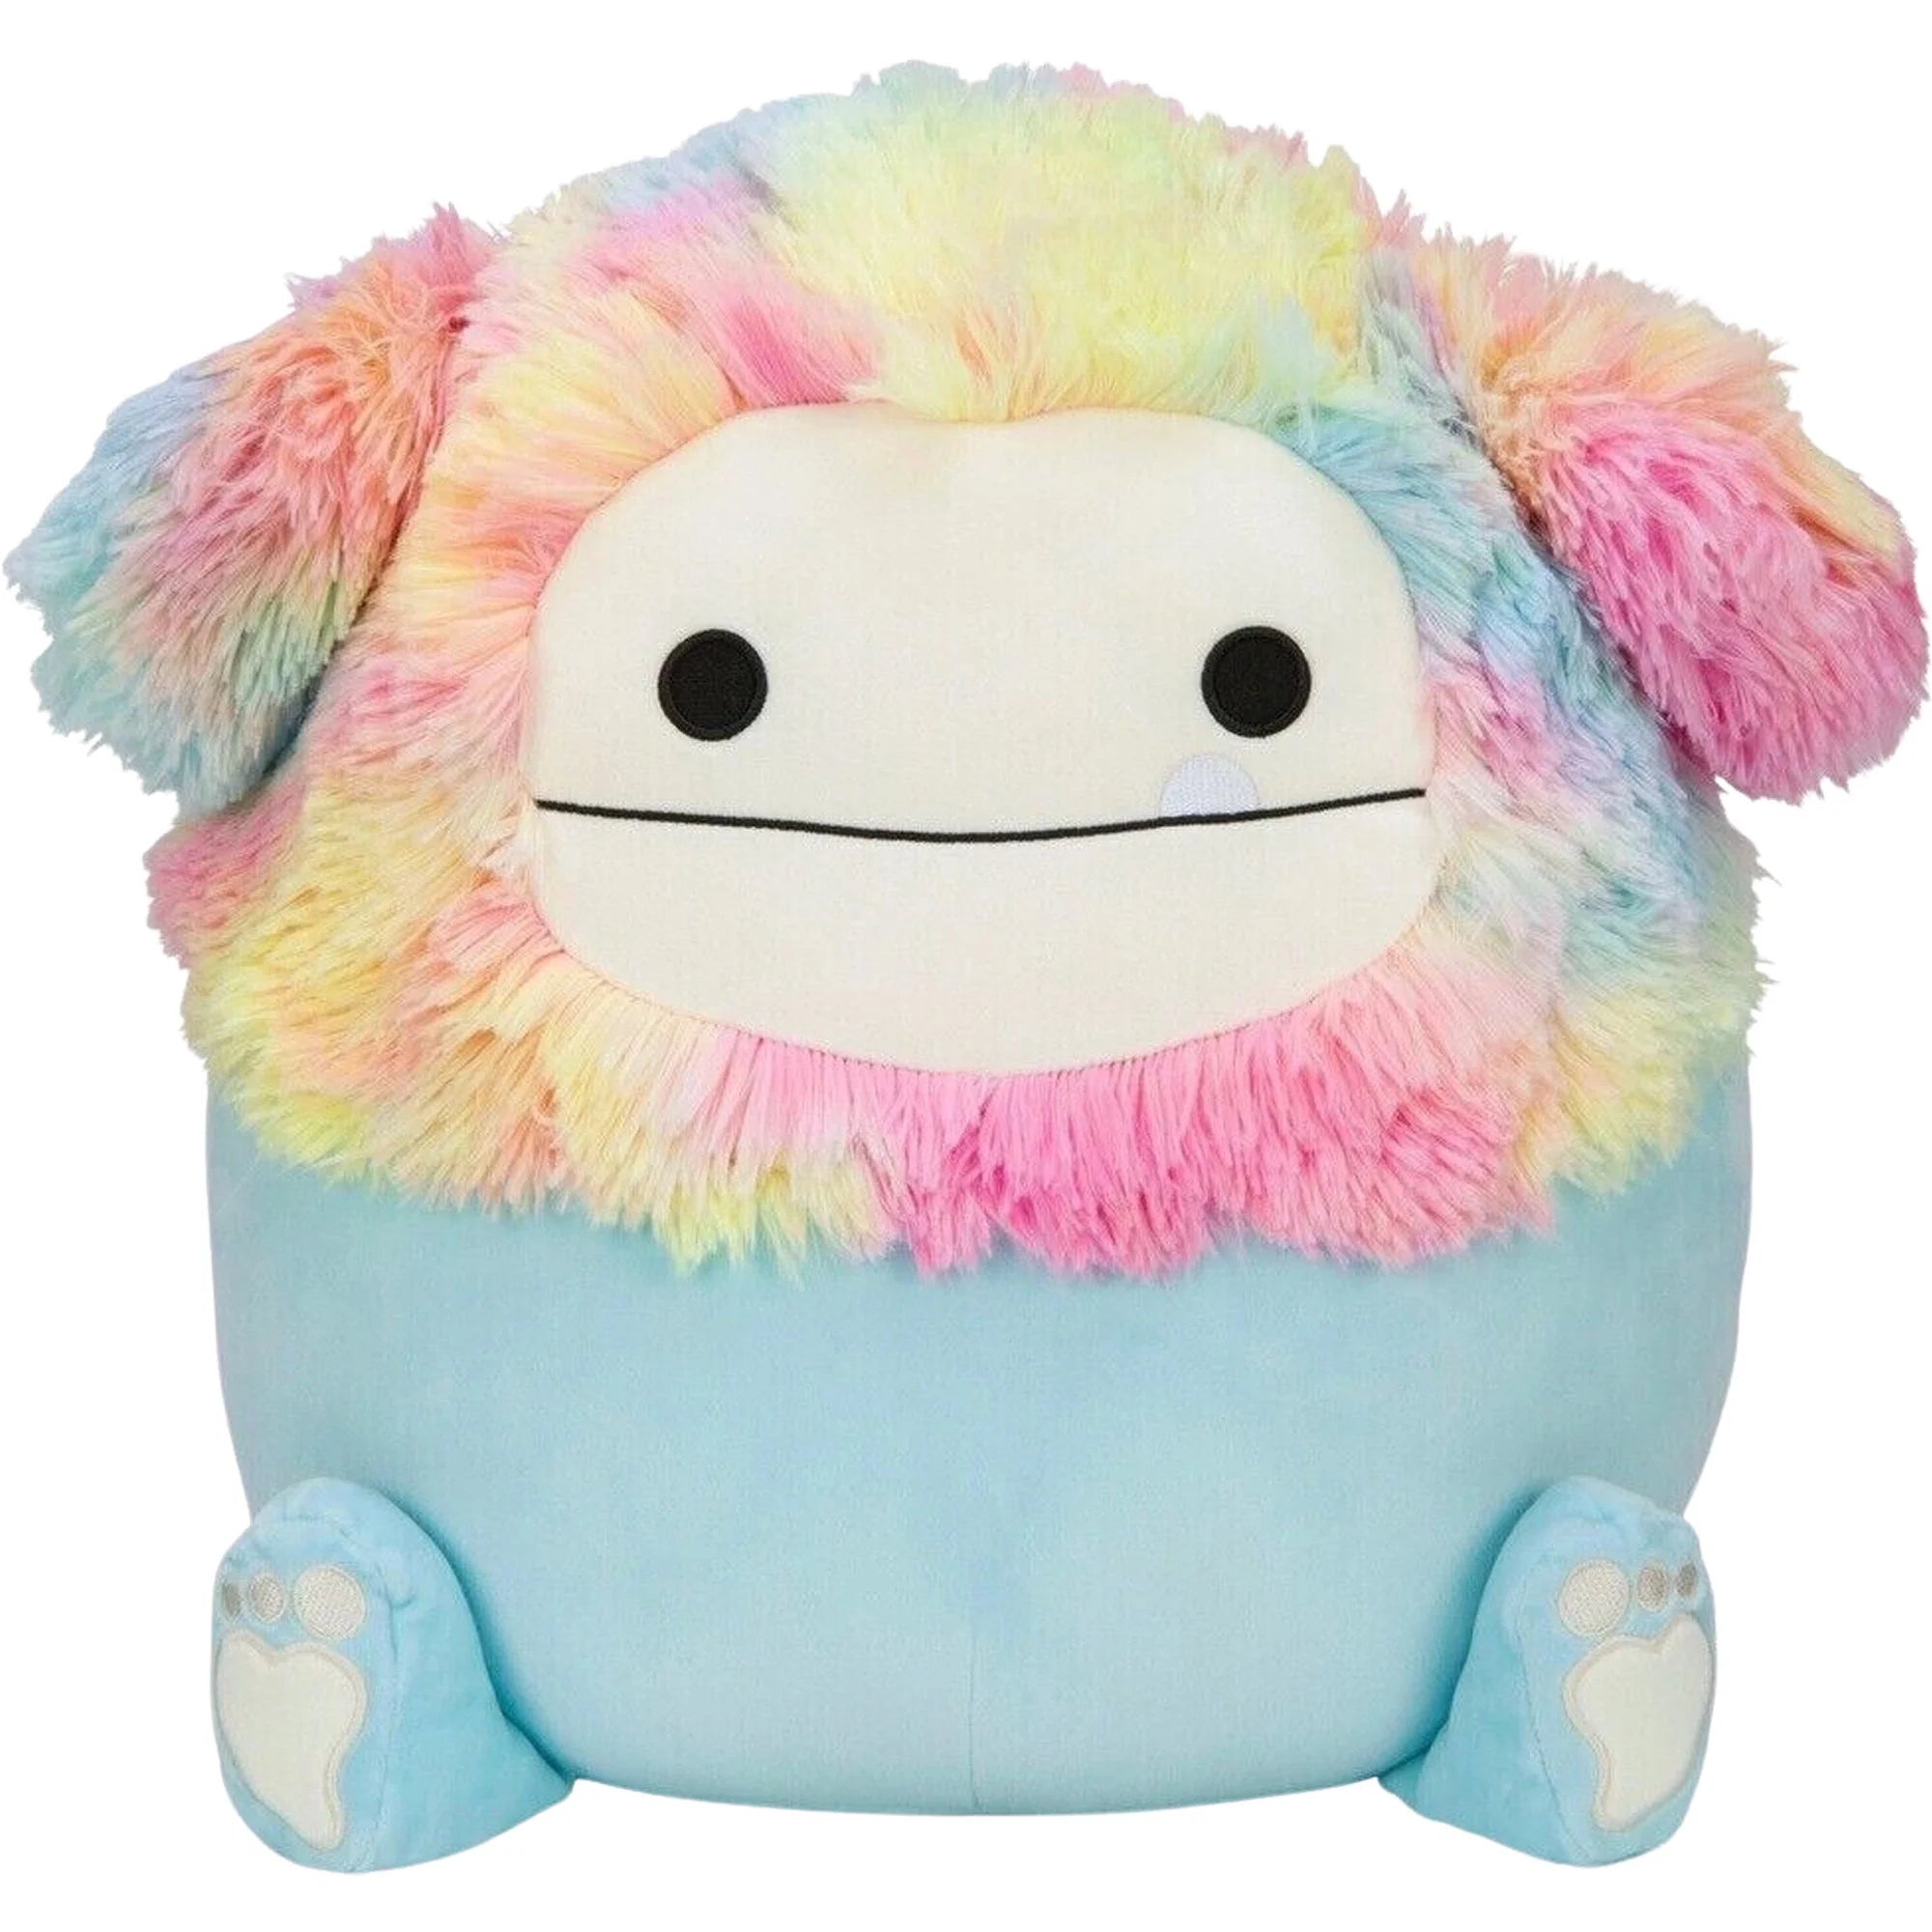 Squishmallows Official Kellytoys Plush 8 Inch Bigfoot Ultimate Soft Stuffed Toy